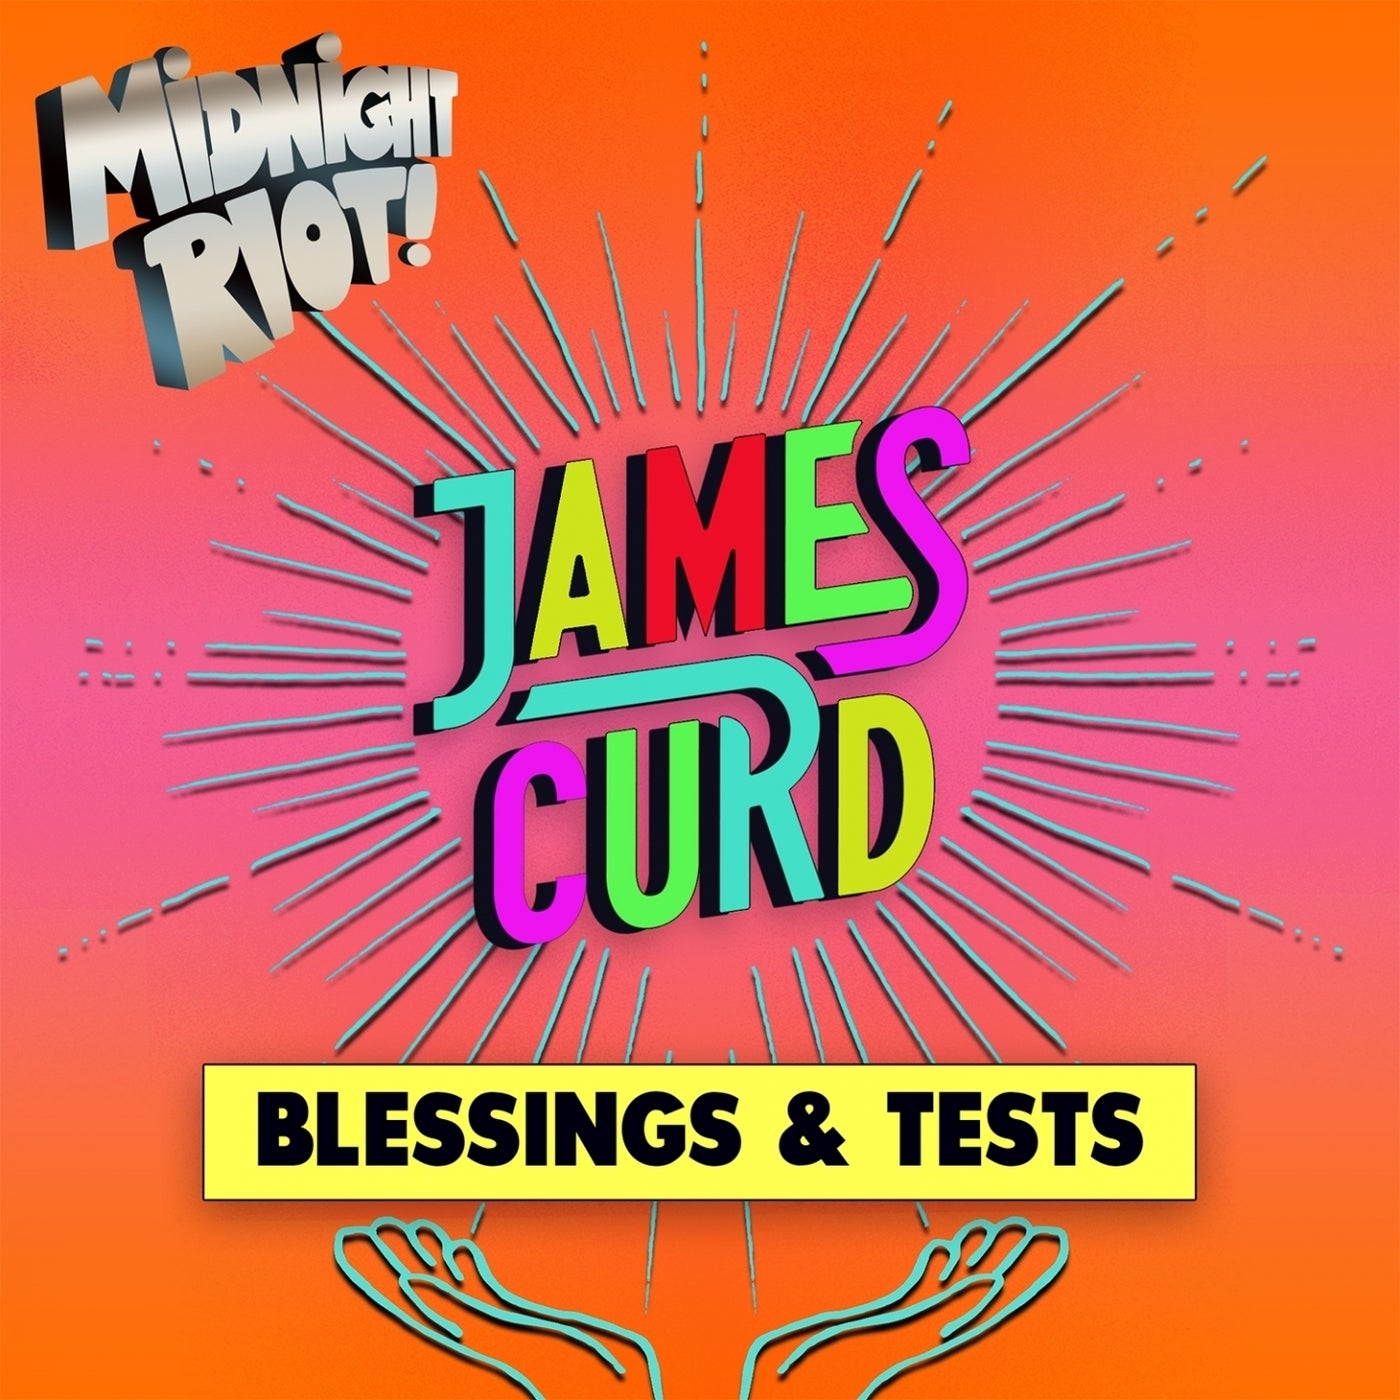 James Curd - Blessings & Tests [MIDRIOTD296]